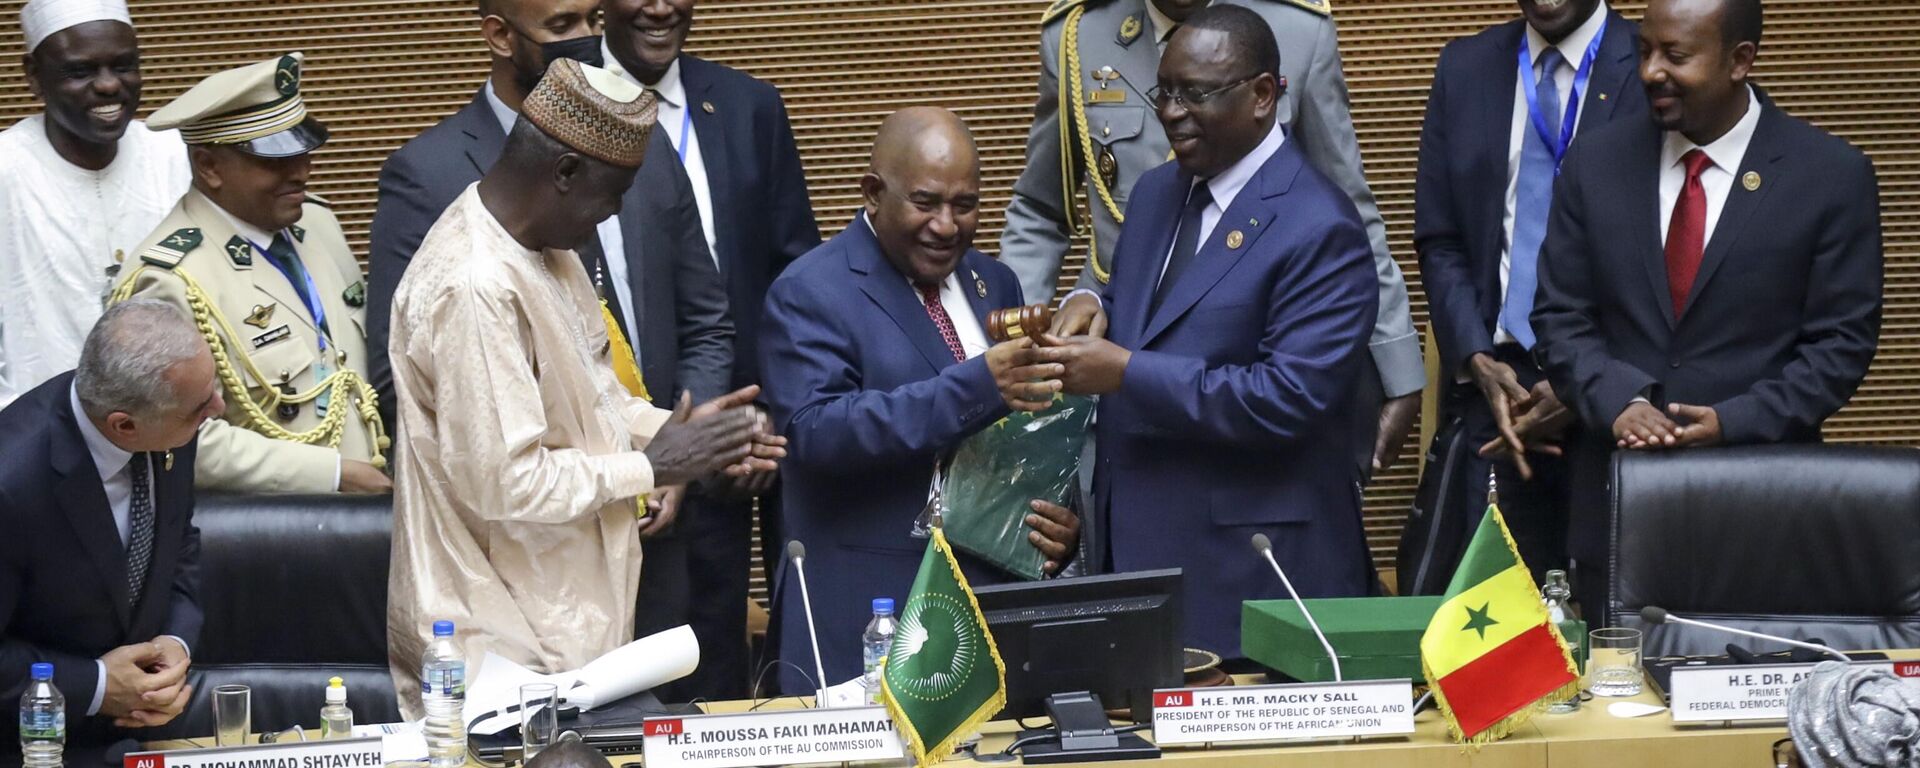 From left, Palestinian Prime Minister Mohammad Shtayyeh, African Union Commission Chairman Moussa Faki Mahamat, Comoros President Azali Assoumani, Senegal President Macky Sall, and Ethiopia President Abiy Ahmed, attend the ceremony to appoint Assoumani as the new African Union (AU) chairperson, in Addis Ababa, Ethiopia Saturday, Feb. 18, 2023. The 36th African Union Summit is taking place in the Ethiopian capital this weekend. (AP Photo) - Sputnik International, 1920, 20.02.2023